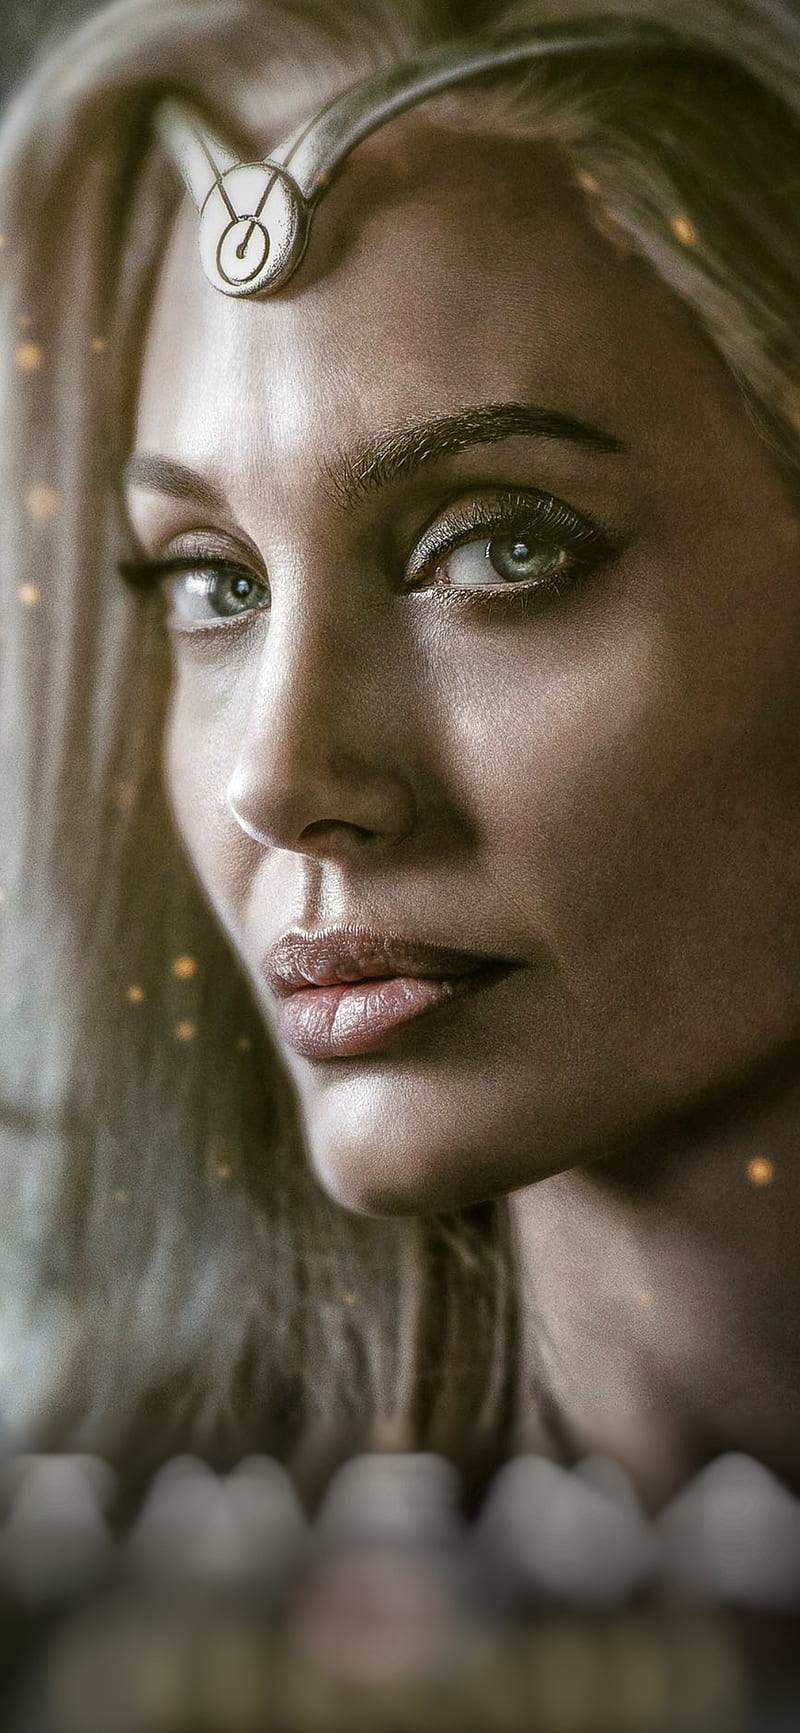 1080x1920  1080x1920 angelina jolie celebrities girls hd for Iphone 6  7 8 wallpaper  Coolwallpapersme